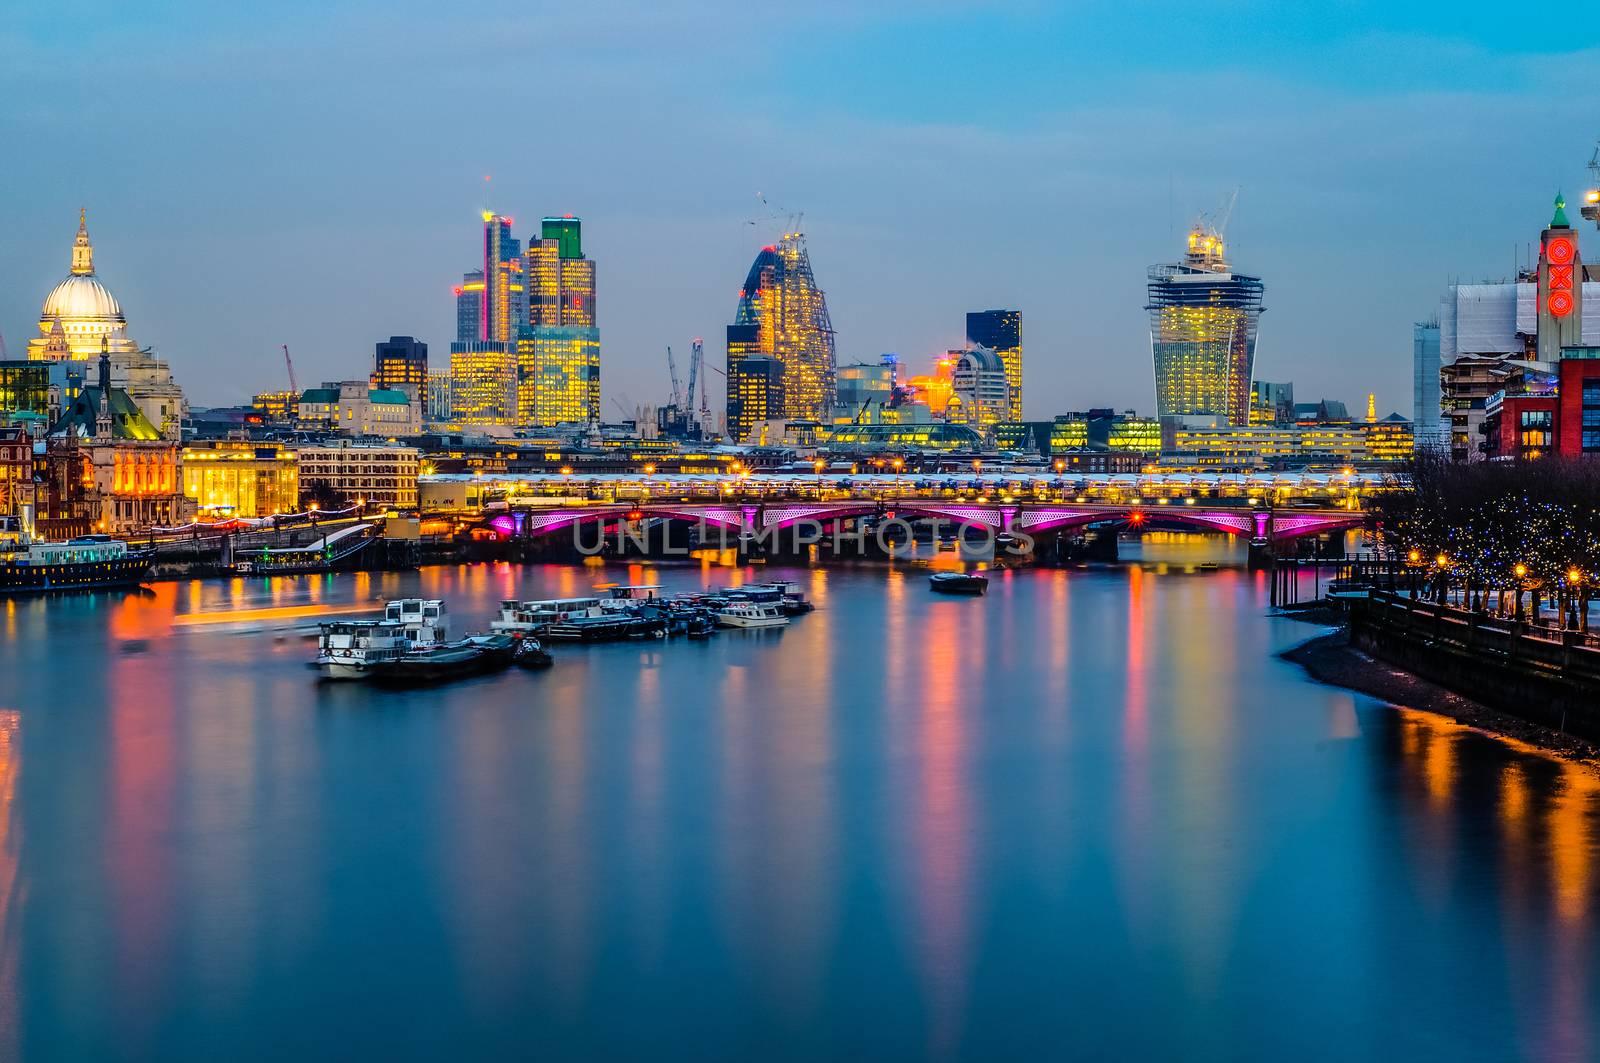 London Skyline - Blackfriars bridge, St Paul Cathedral, The City and the Oxo Tower, Thames River